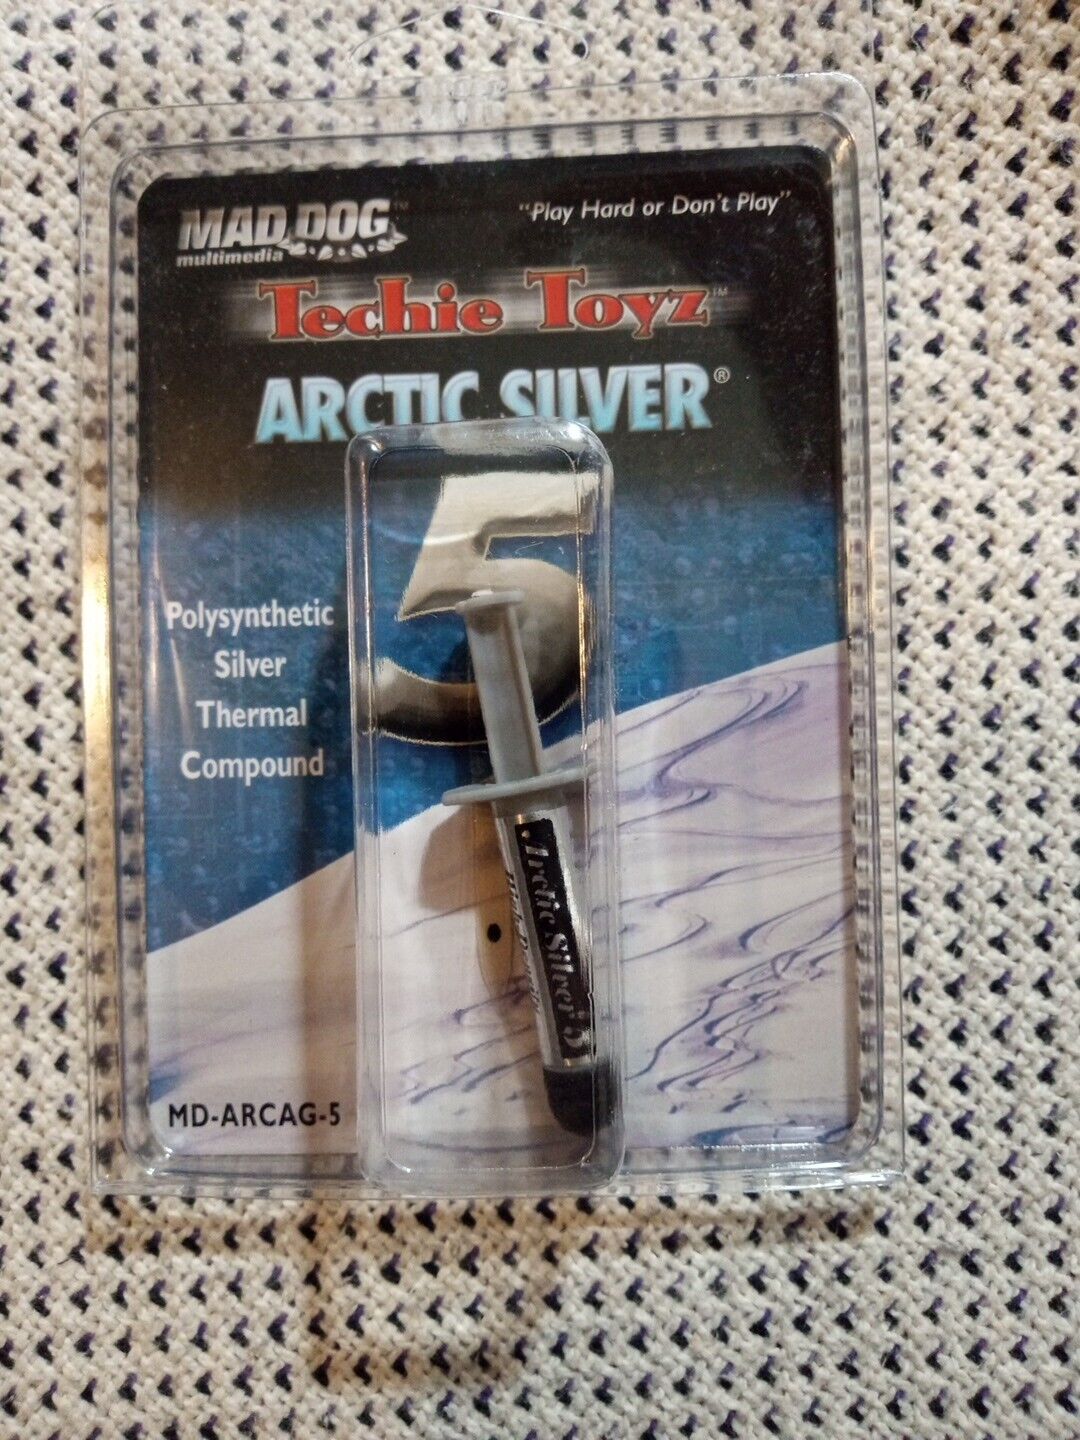 Mad Dog Techie Toyz Arctic Silver 5 3.5G Thermal Compound 3.5Grams Made in USA B